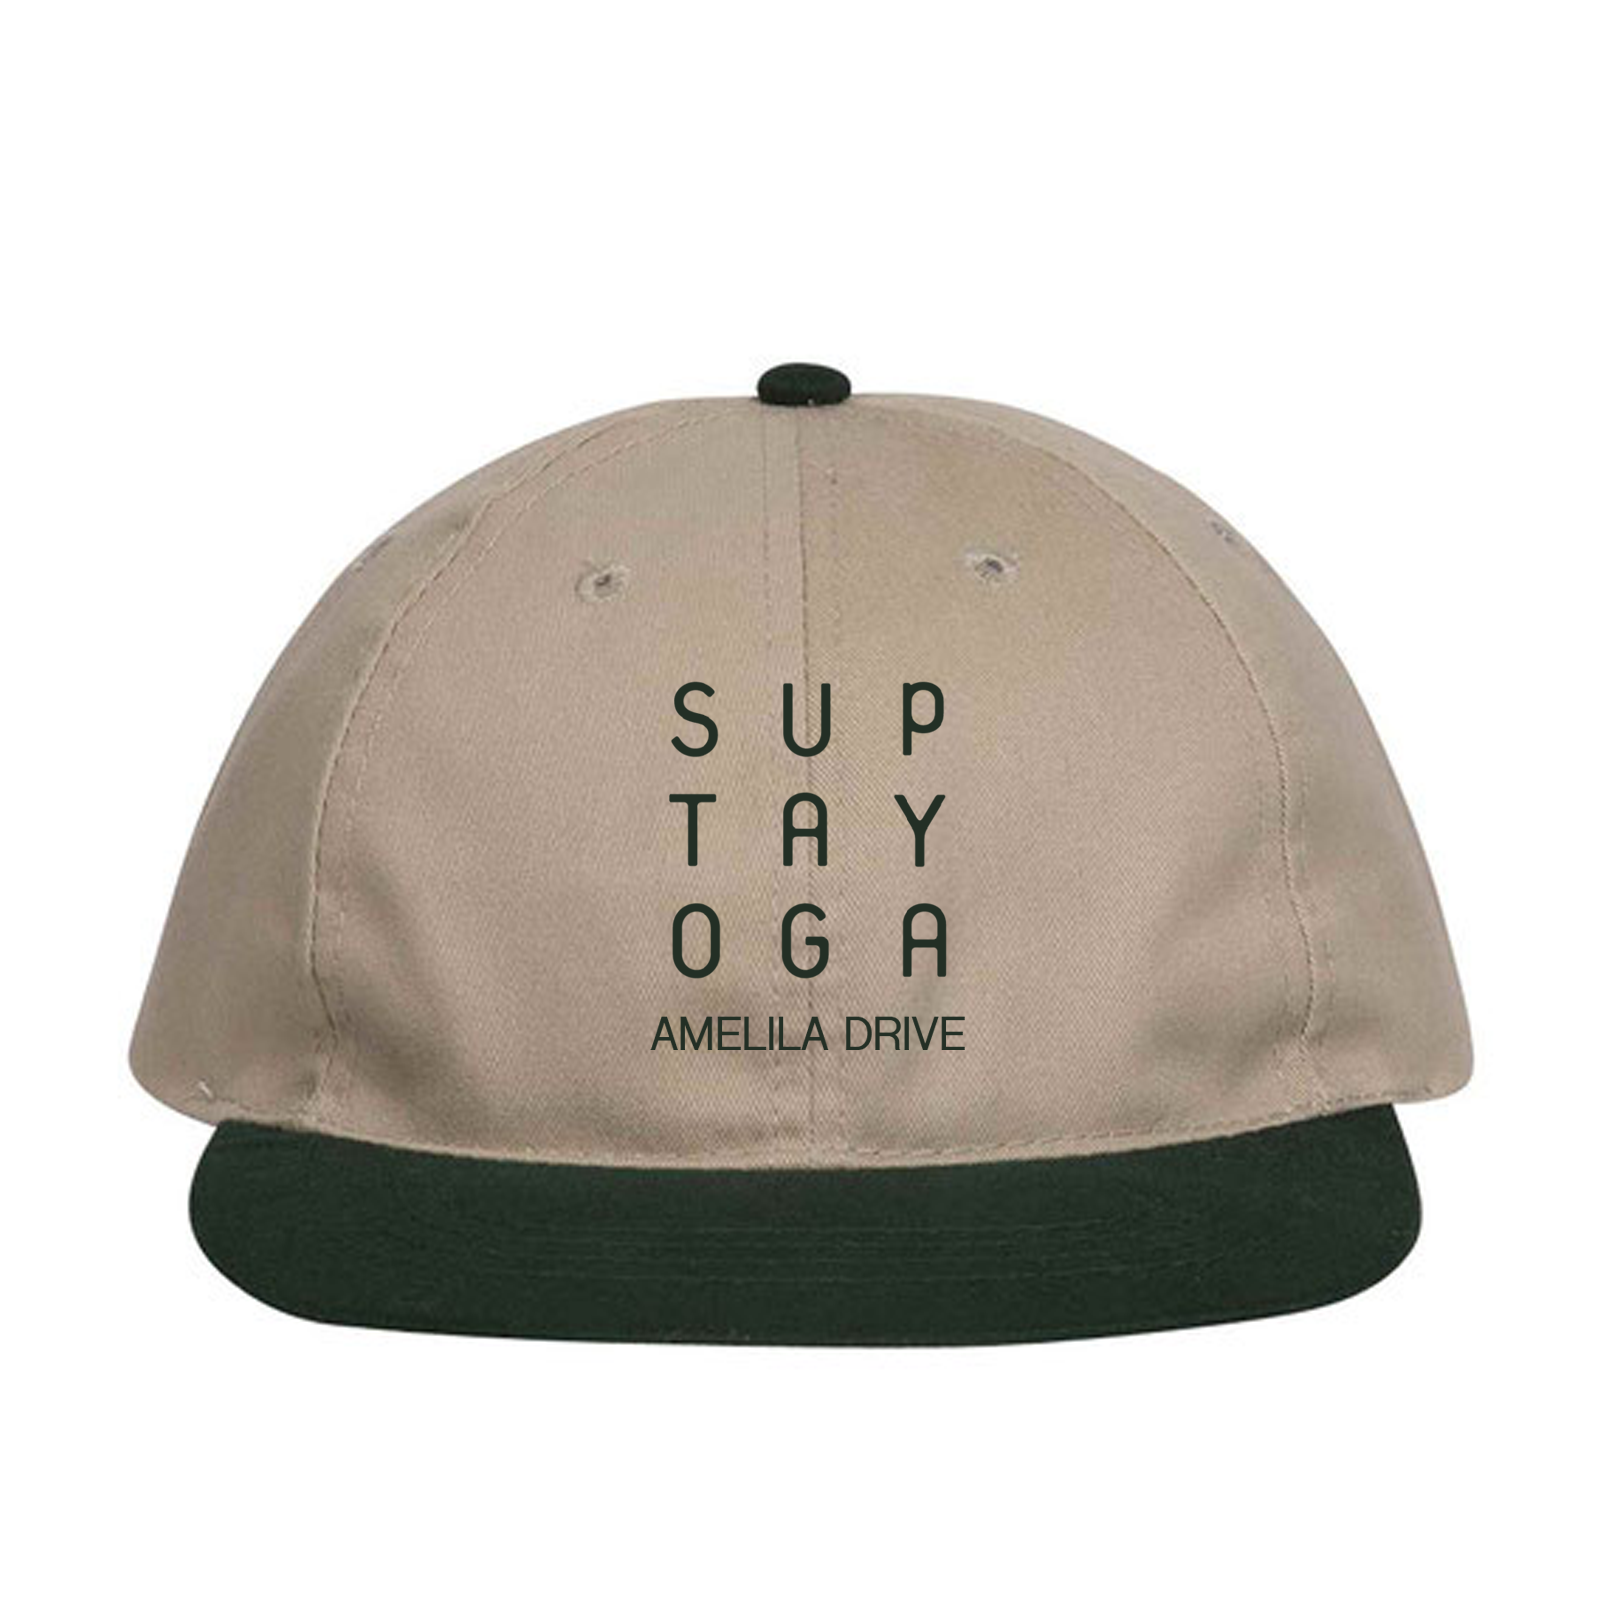 Brushed cotton twill soft visor solid and two tone color six panel low profile pro style caps